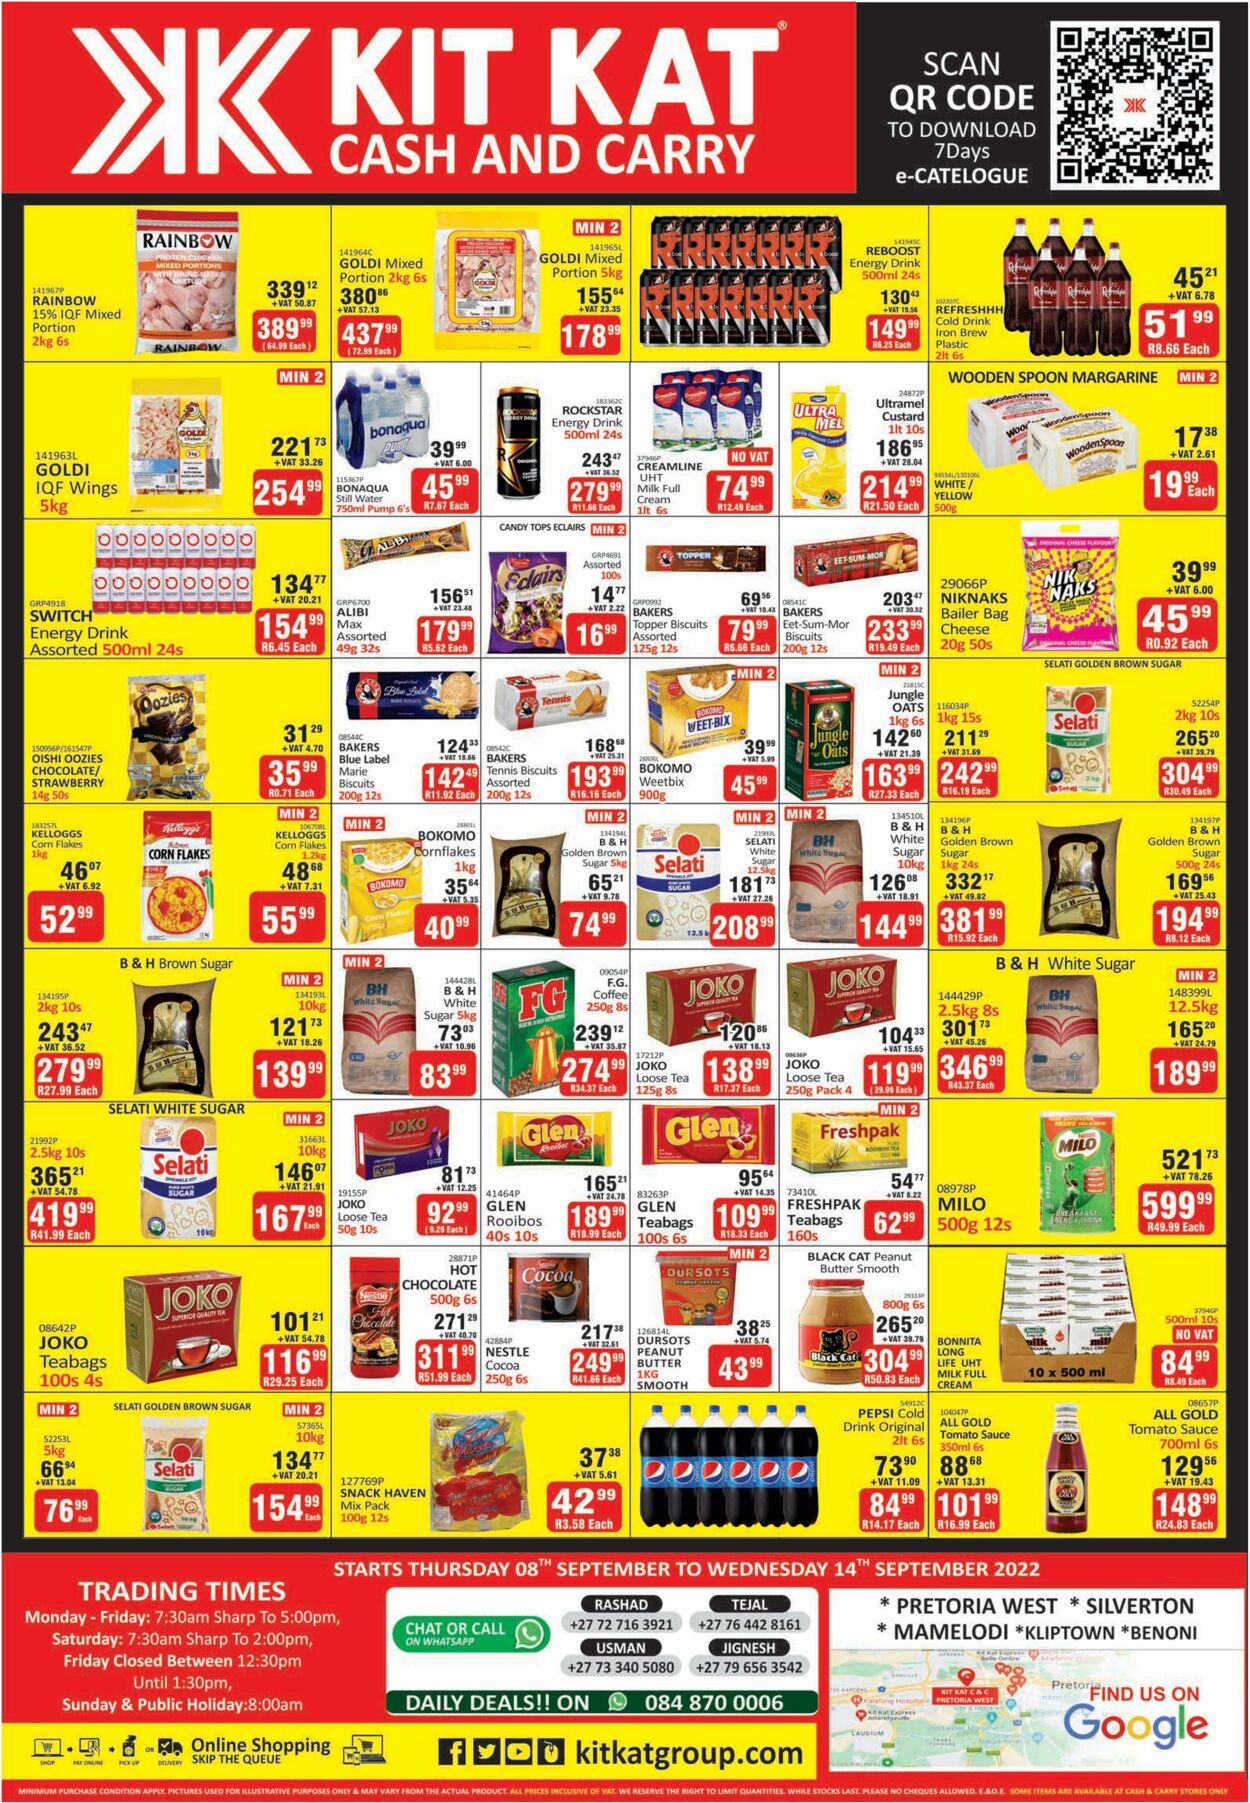 Special Kit Kat Cash and Carry 08.09.2022 - 14.09.2022